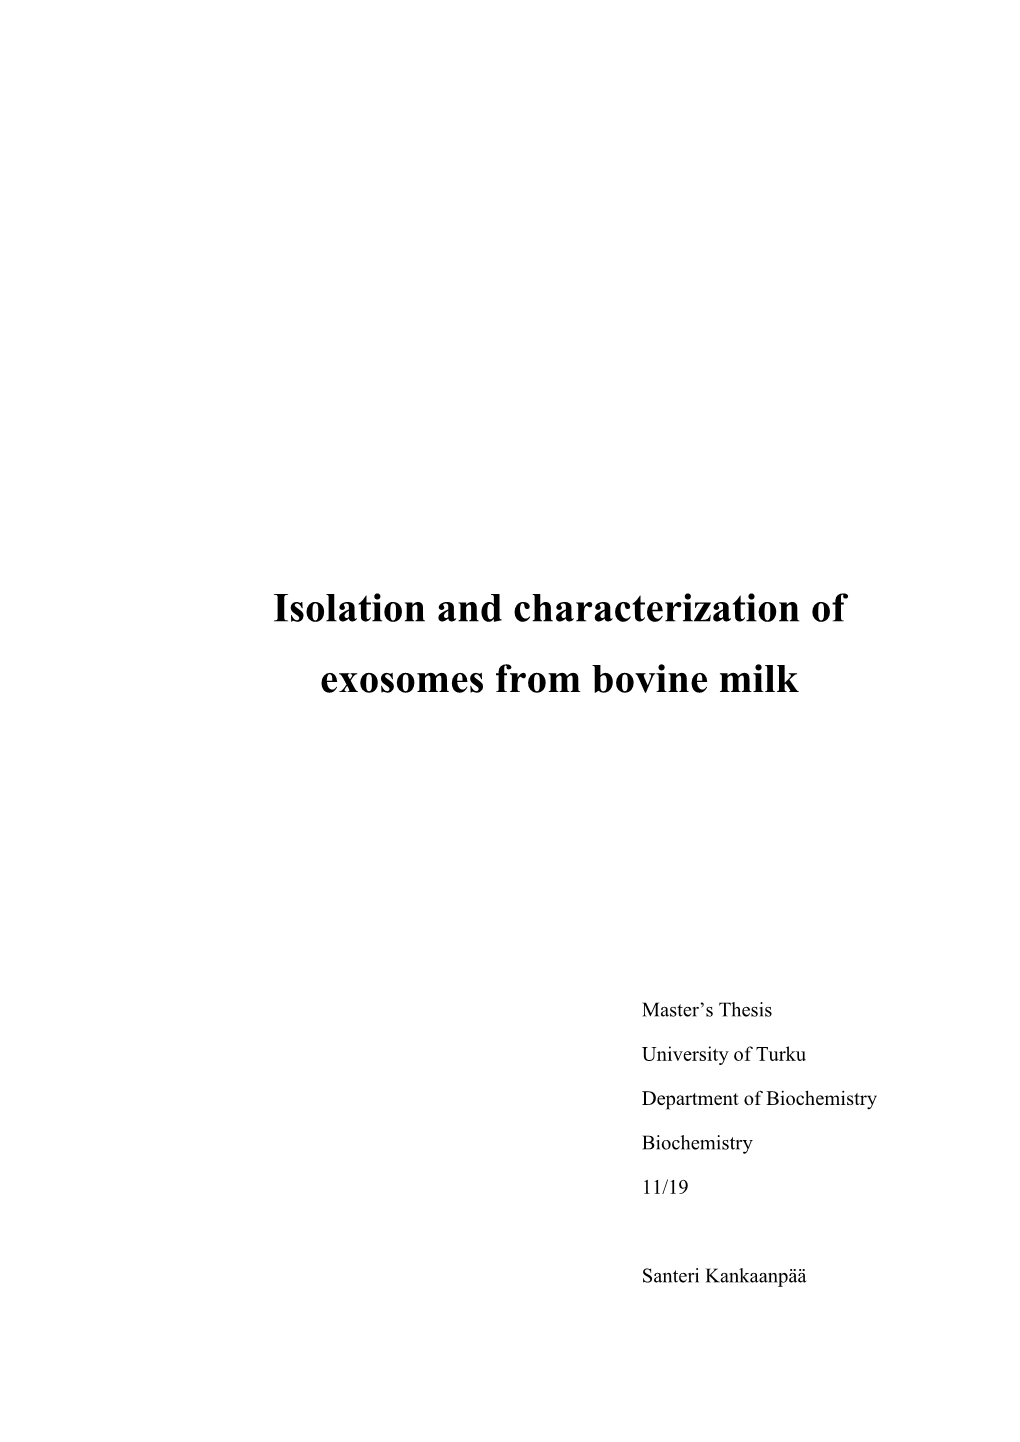 Isolation and Characterization of Exosomes from Bovine Milk